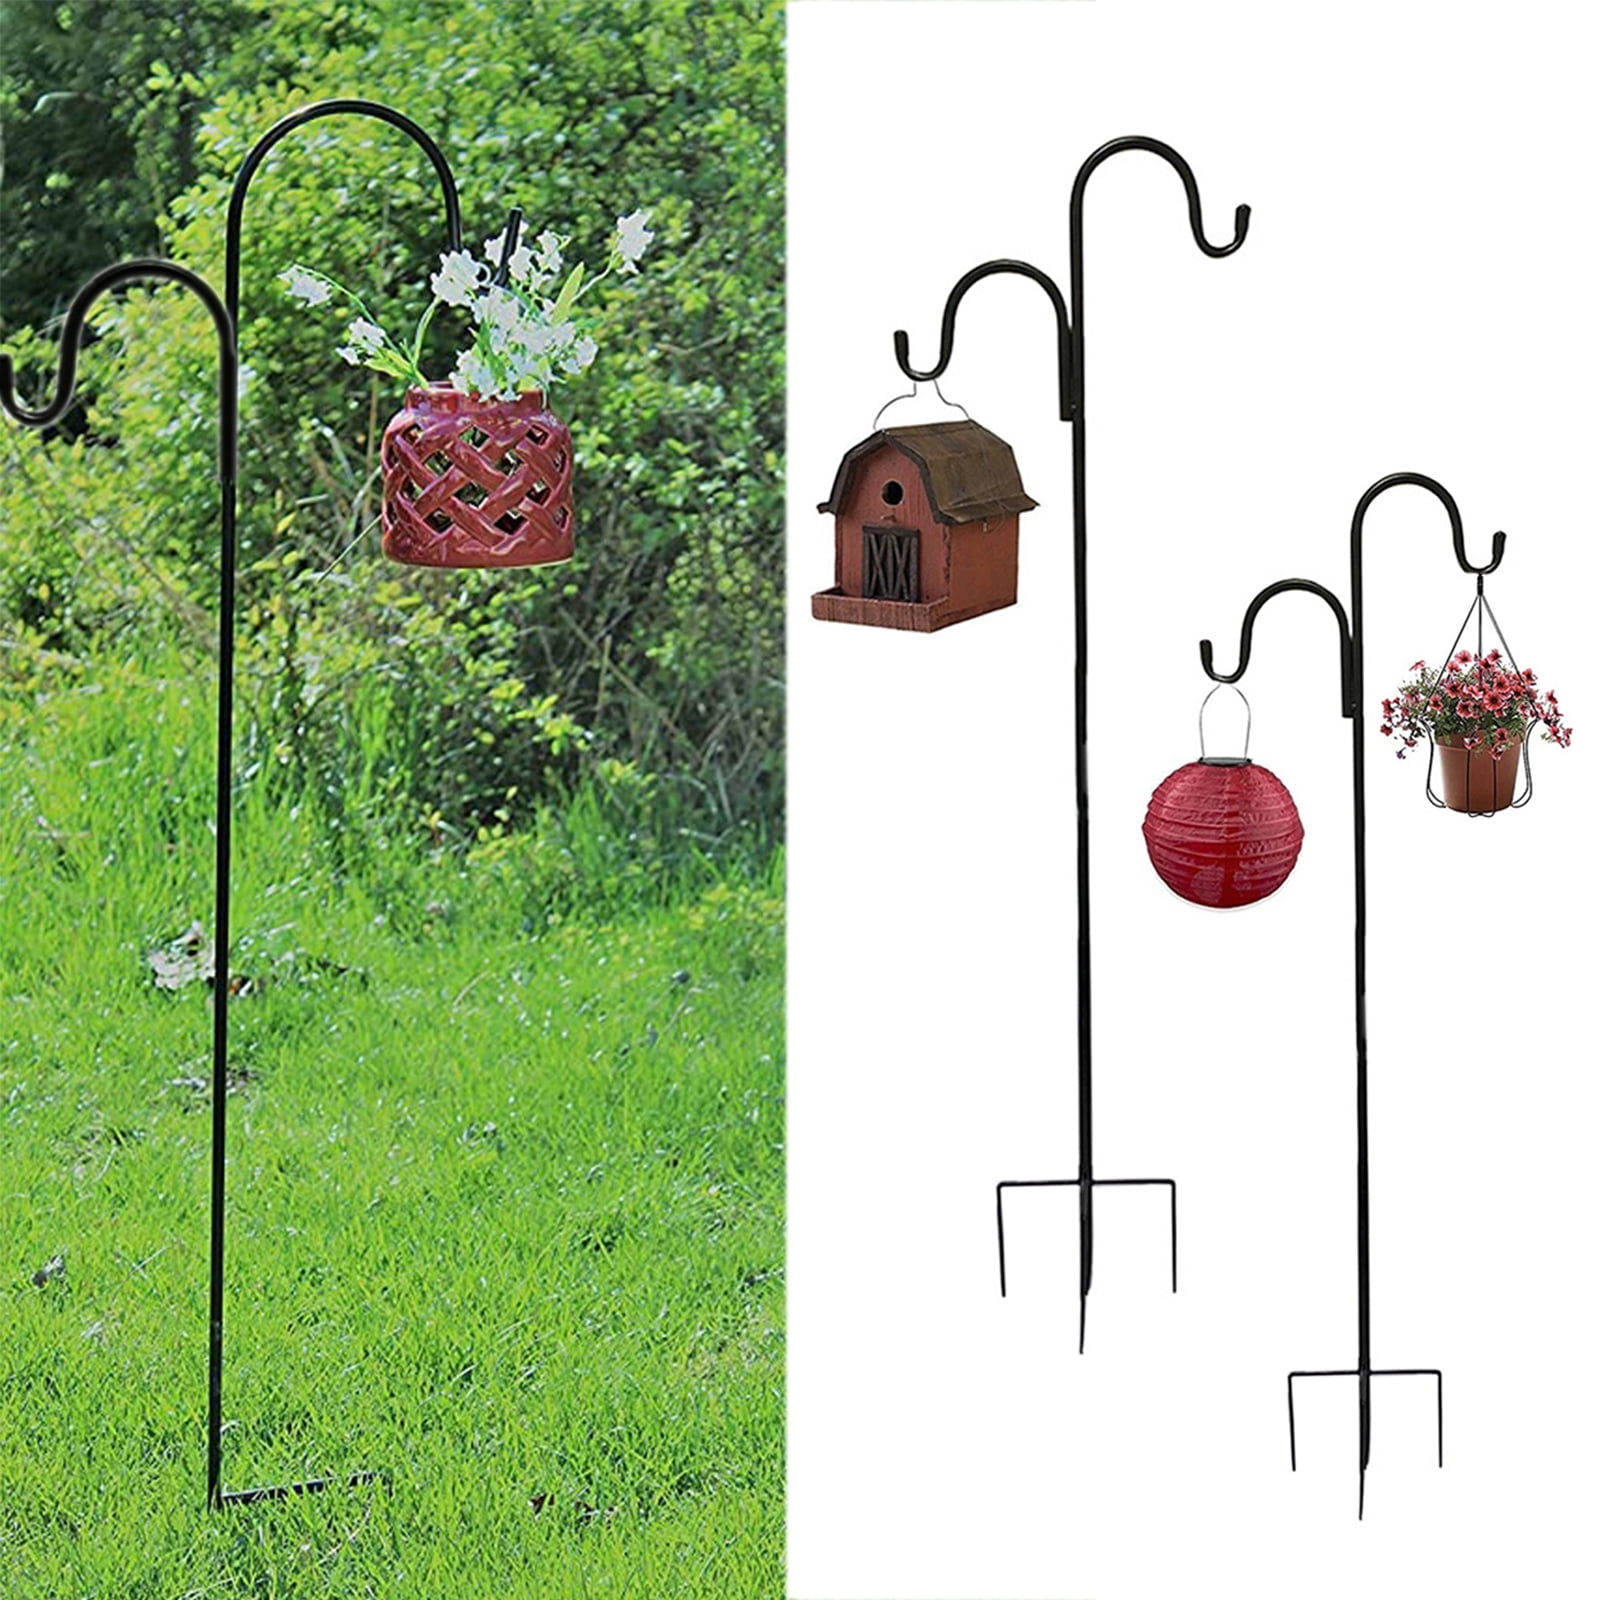 8 inch/2 Pack Gtongoko Hanging Plant Bracket Wall Hook,Heavy Duty Curved Hook,C-Typed Decorative Plant Hanger for Hanging Planters Bird Feeders,Wind Chimes,Black,2 Pack Lanterns 